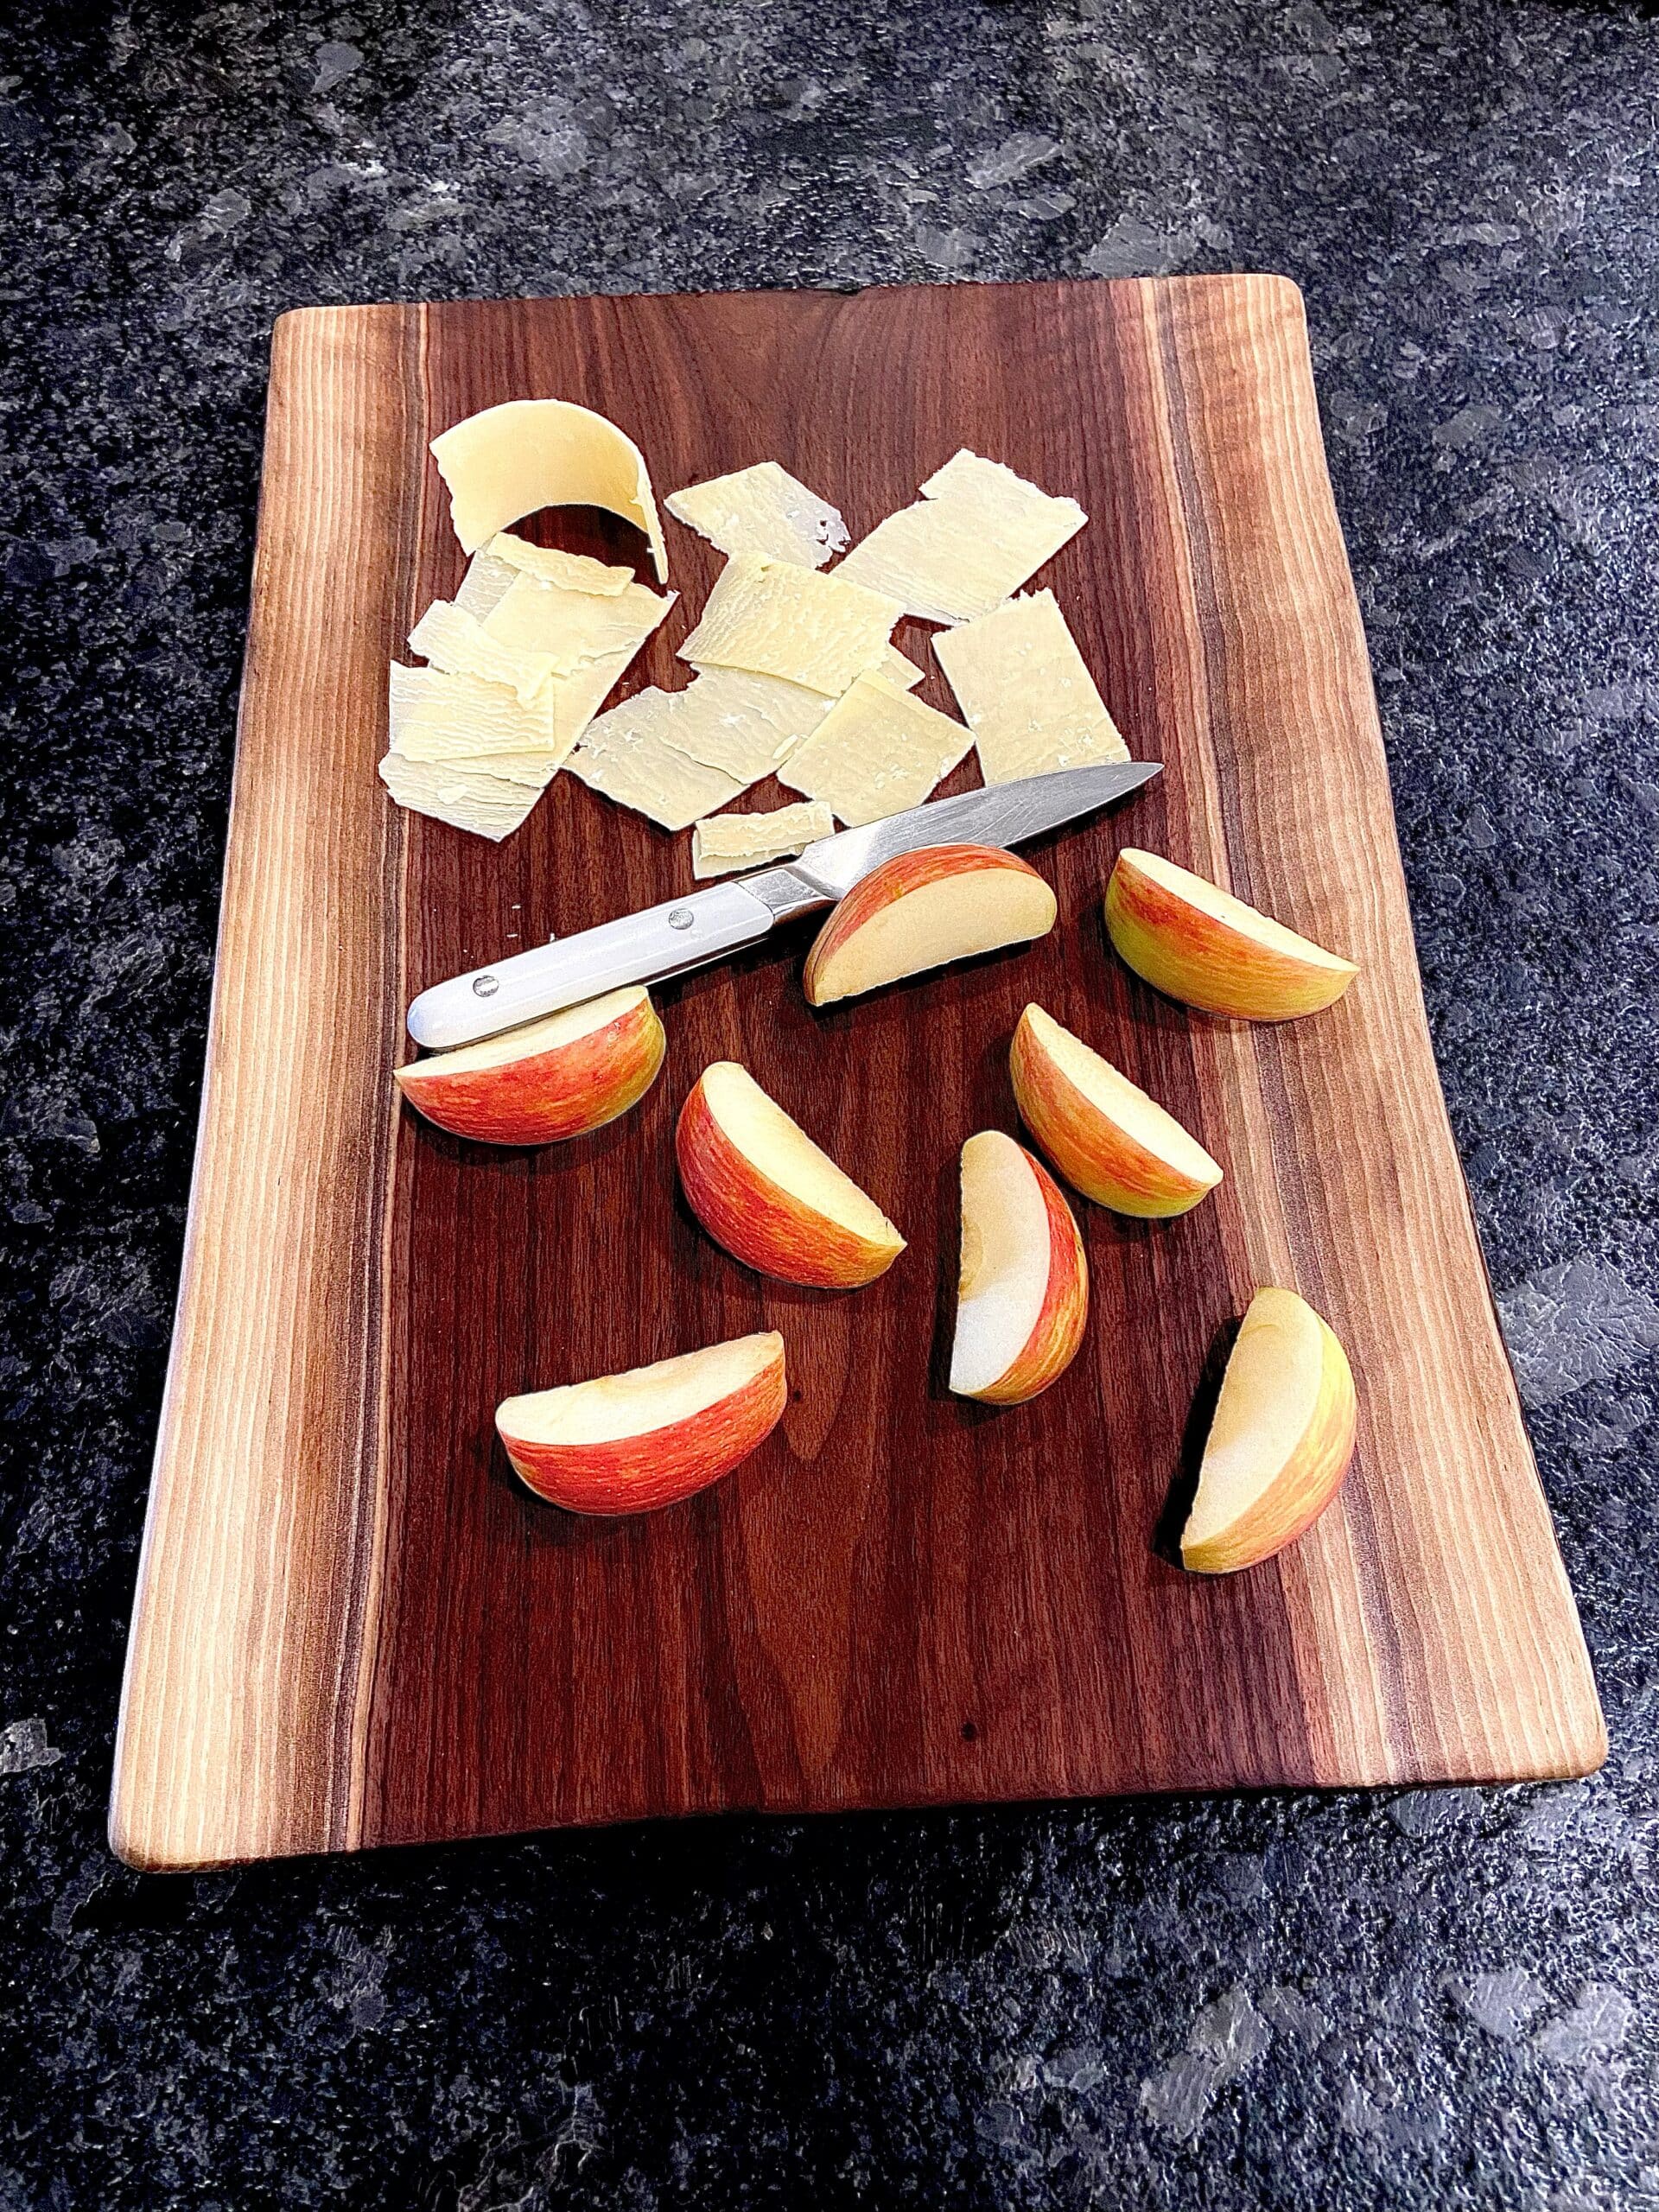 What Is the Best Non-Toxic Cutting Board?